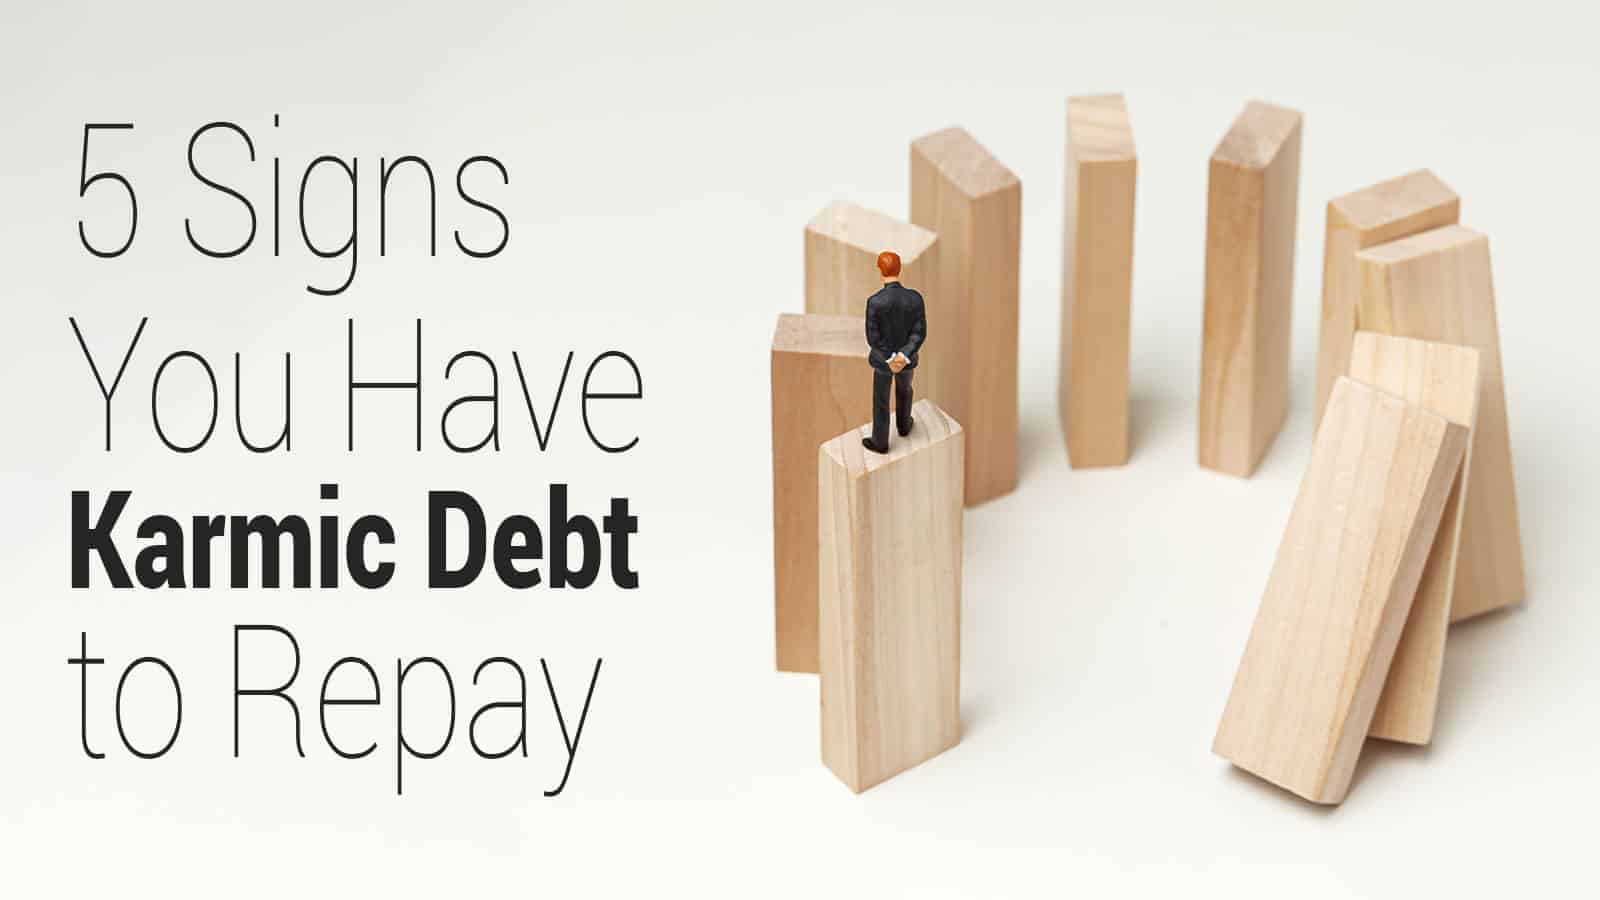 5 Signs You Have Karmic Debt to Repay